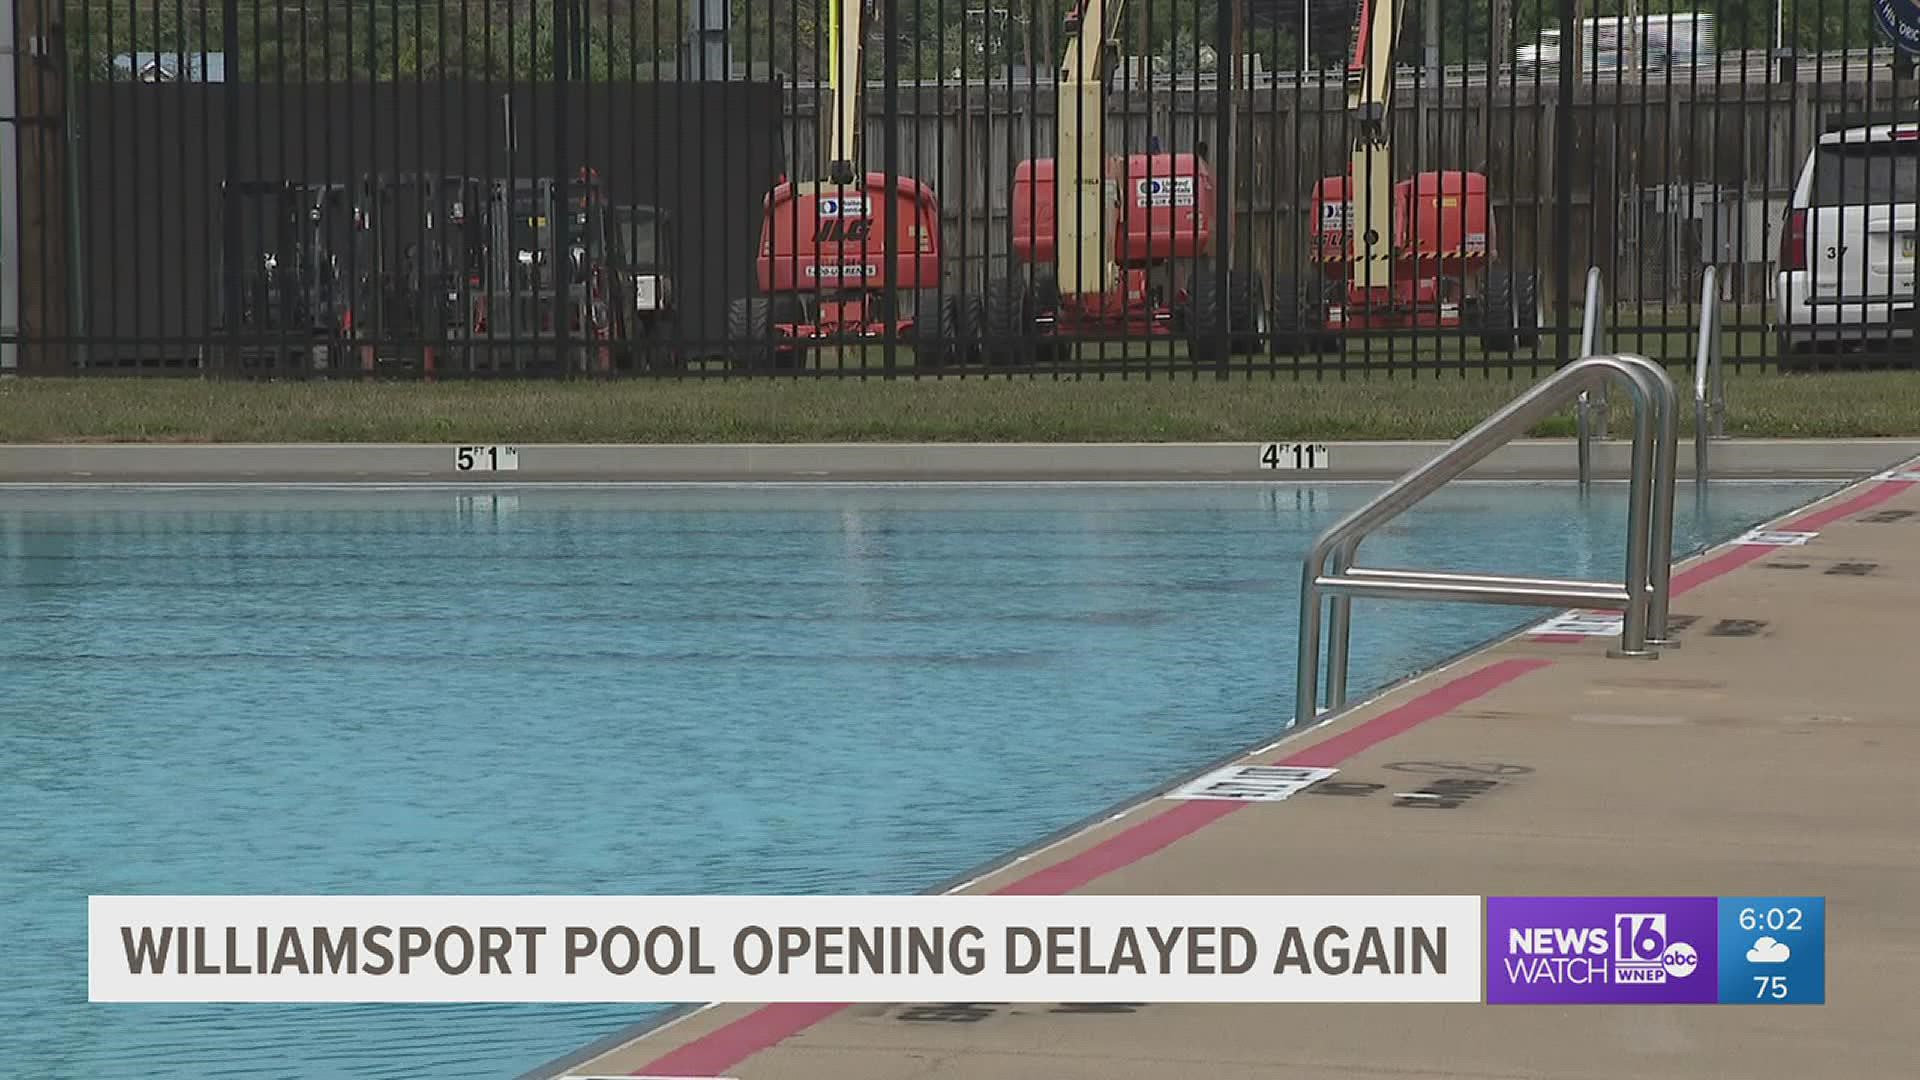 They are aiming to open Memorial Pool early next week and should know more on Monday.